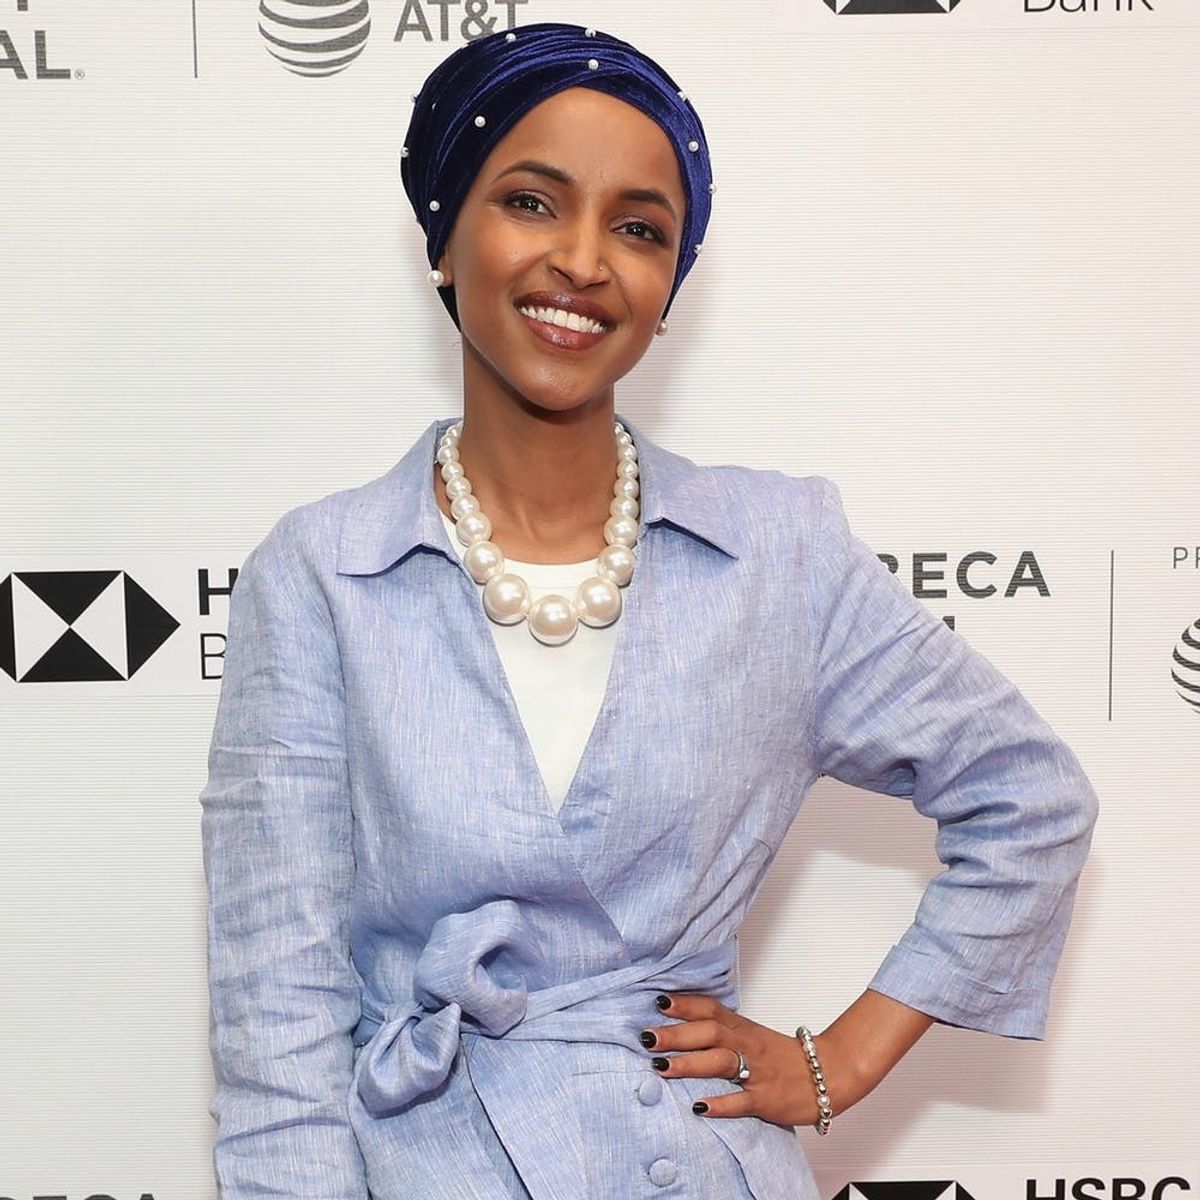 Minnesota Primary Winner Ilhan Omar Could Become the First Hijabi Muslim Woman in Congress